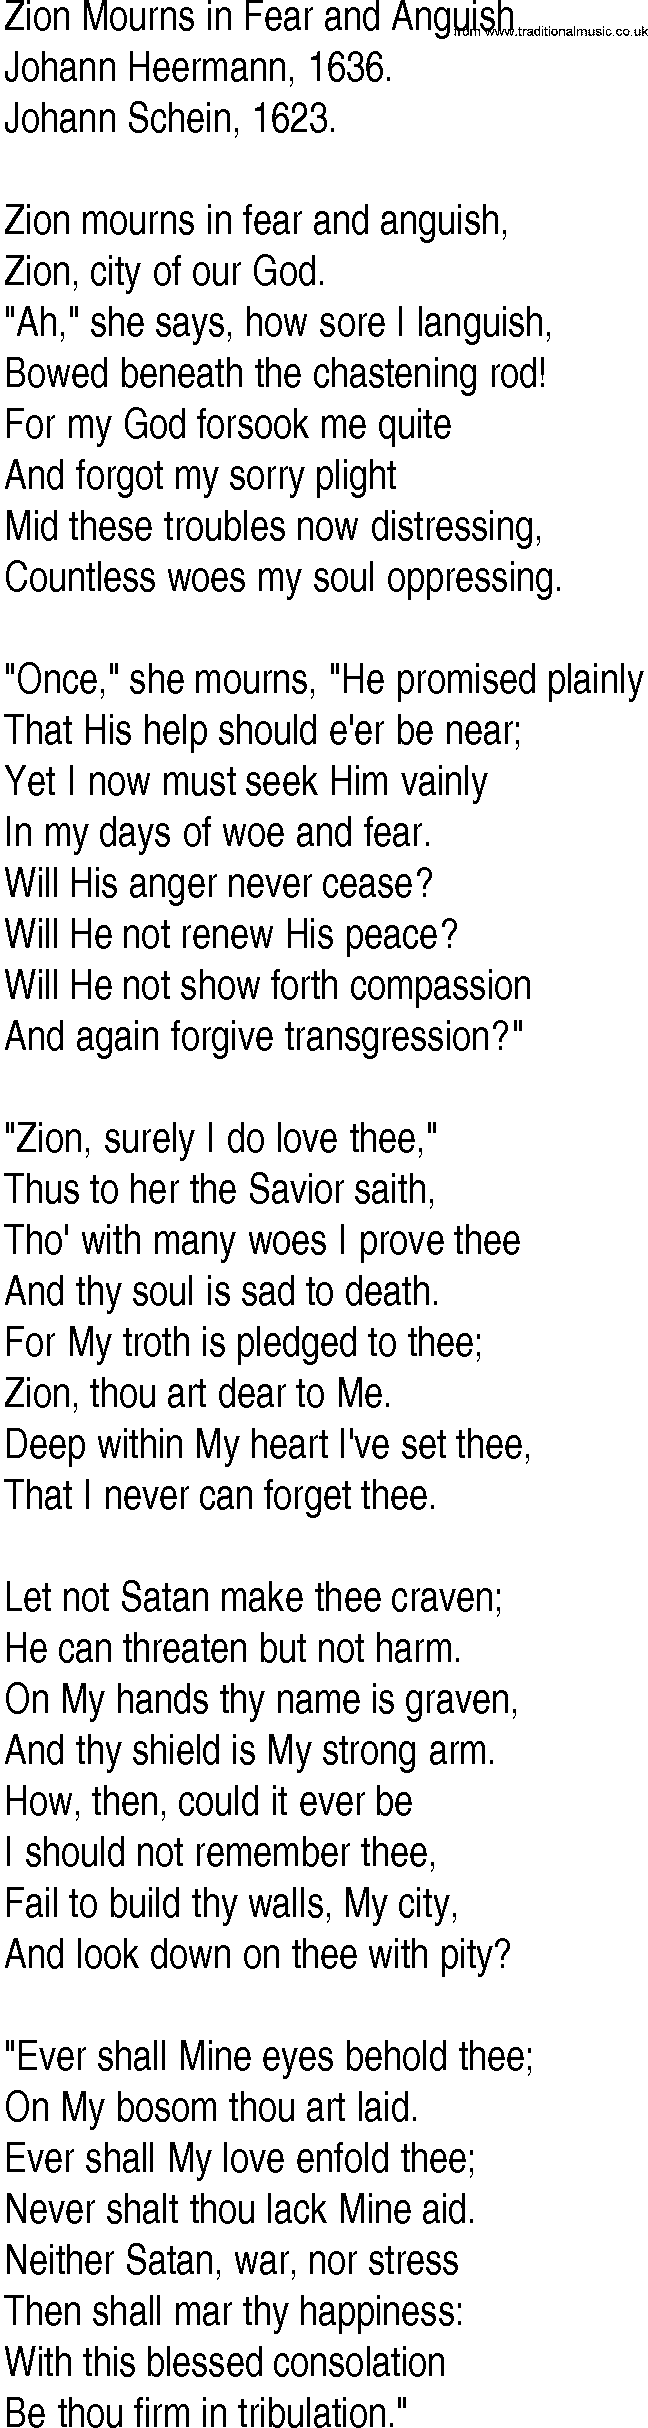 Hymn and Gospel Song: Zion Mourns in Fear and Anguish by Johann Heermann lyrics